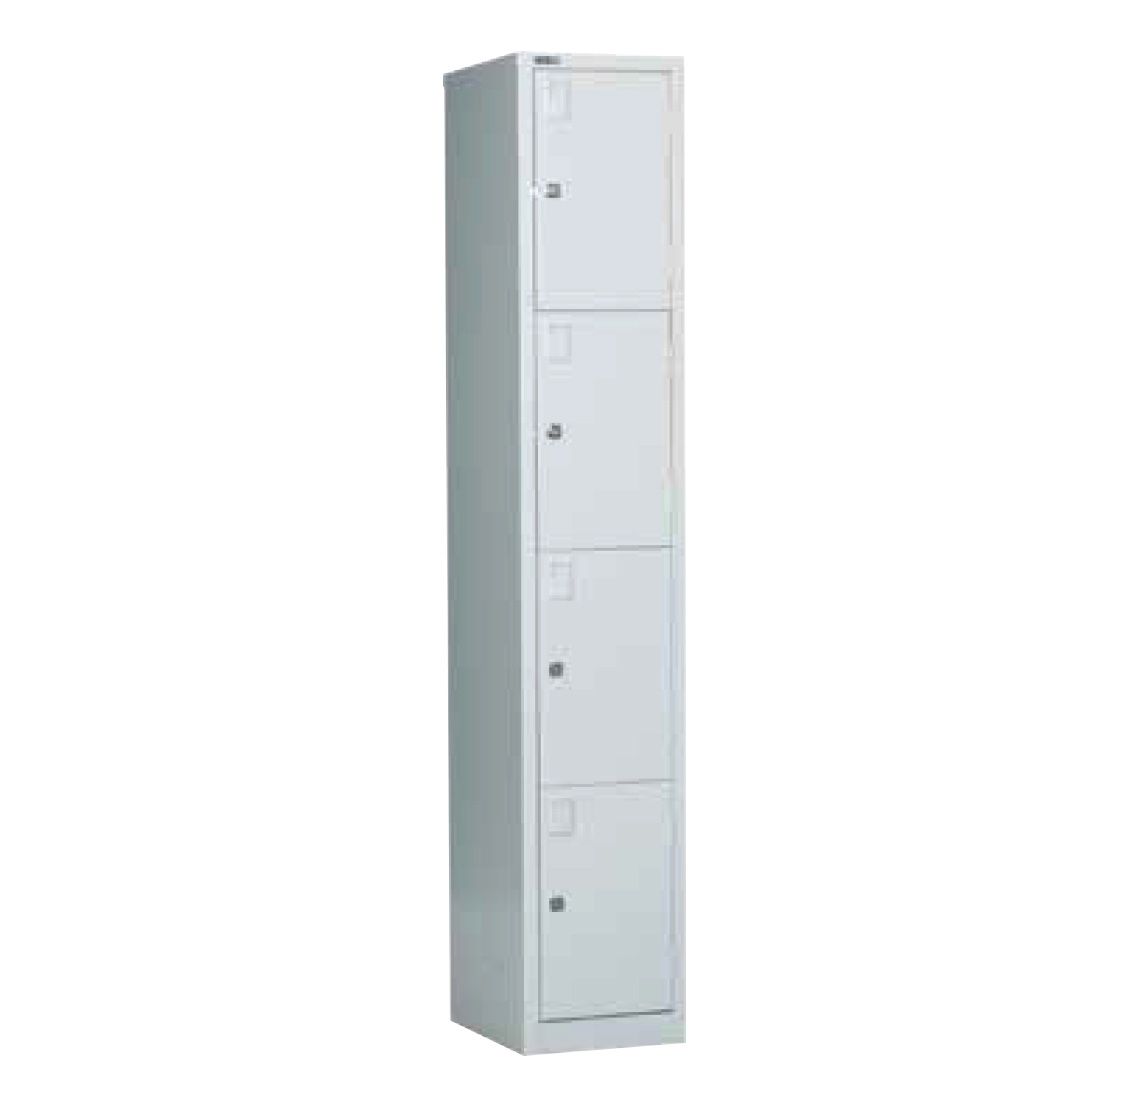 Lockers - Storage - Business Solutions | Compact Business Systems Australia